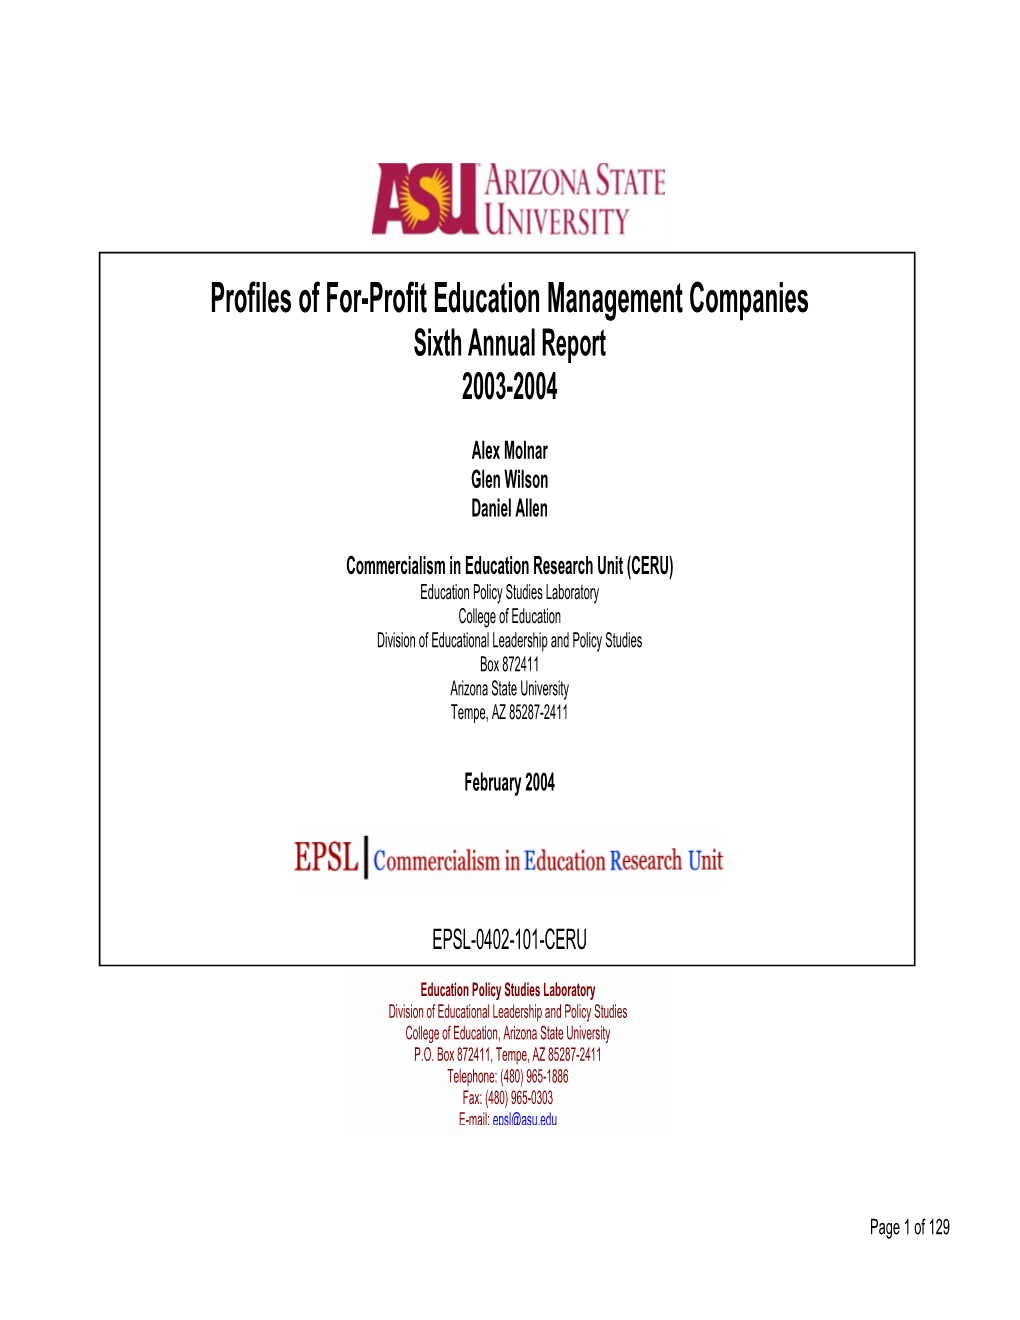 Profiles of For-Profit Education Management Companies Sixth Annual Report 2003-2004